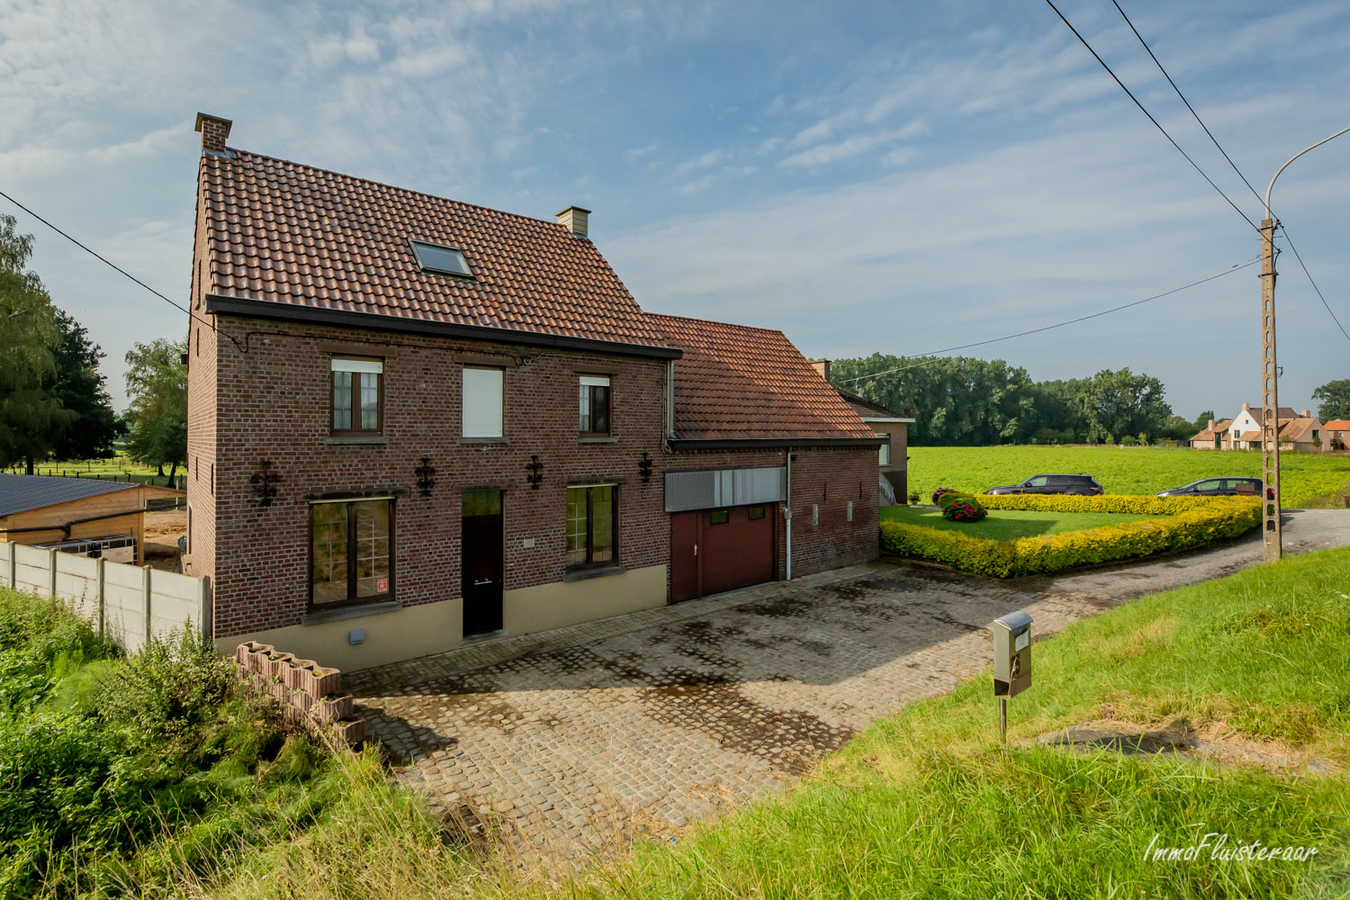 Property sold in Zwalm